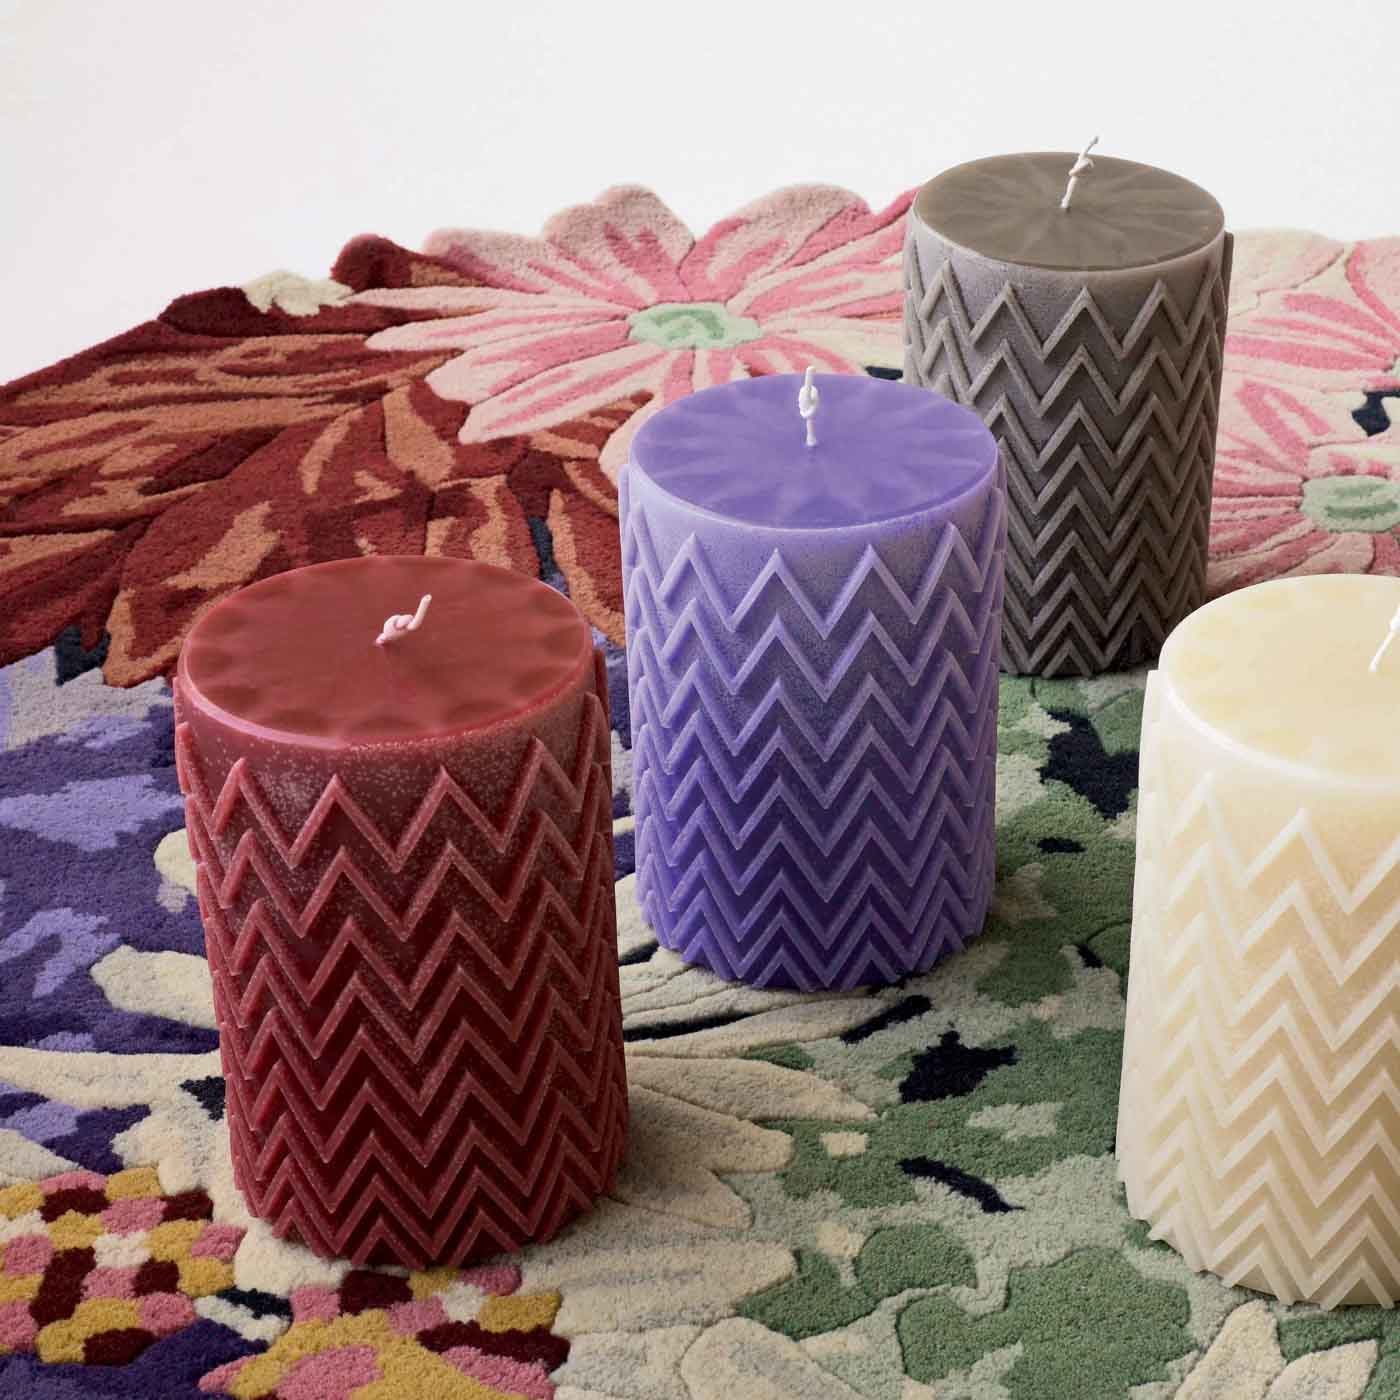 Chevron Red Candle - Missoni Home Collection